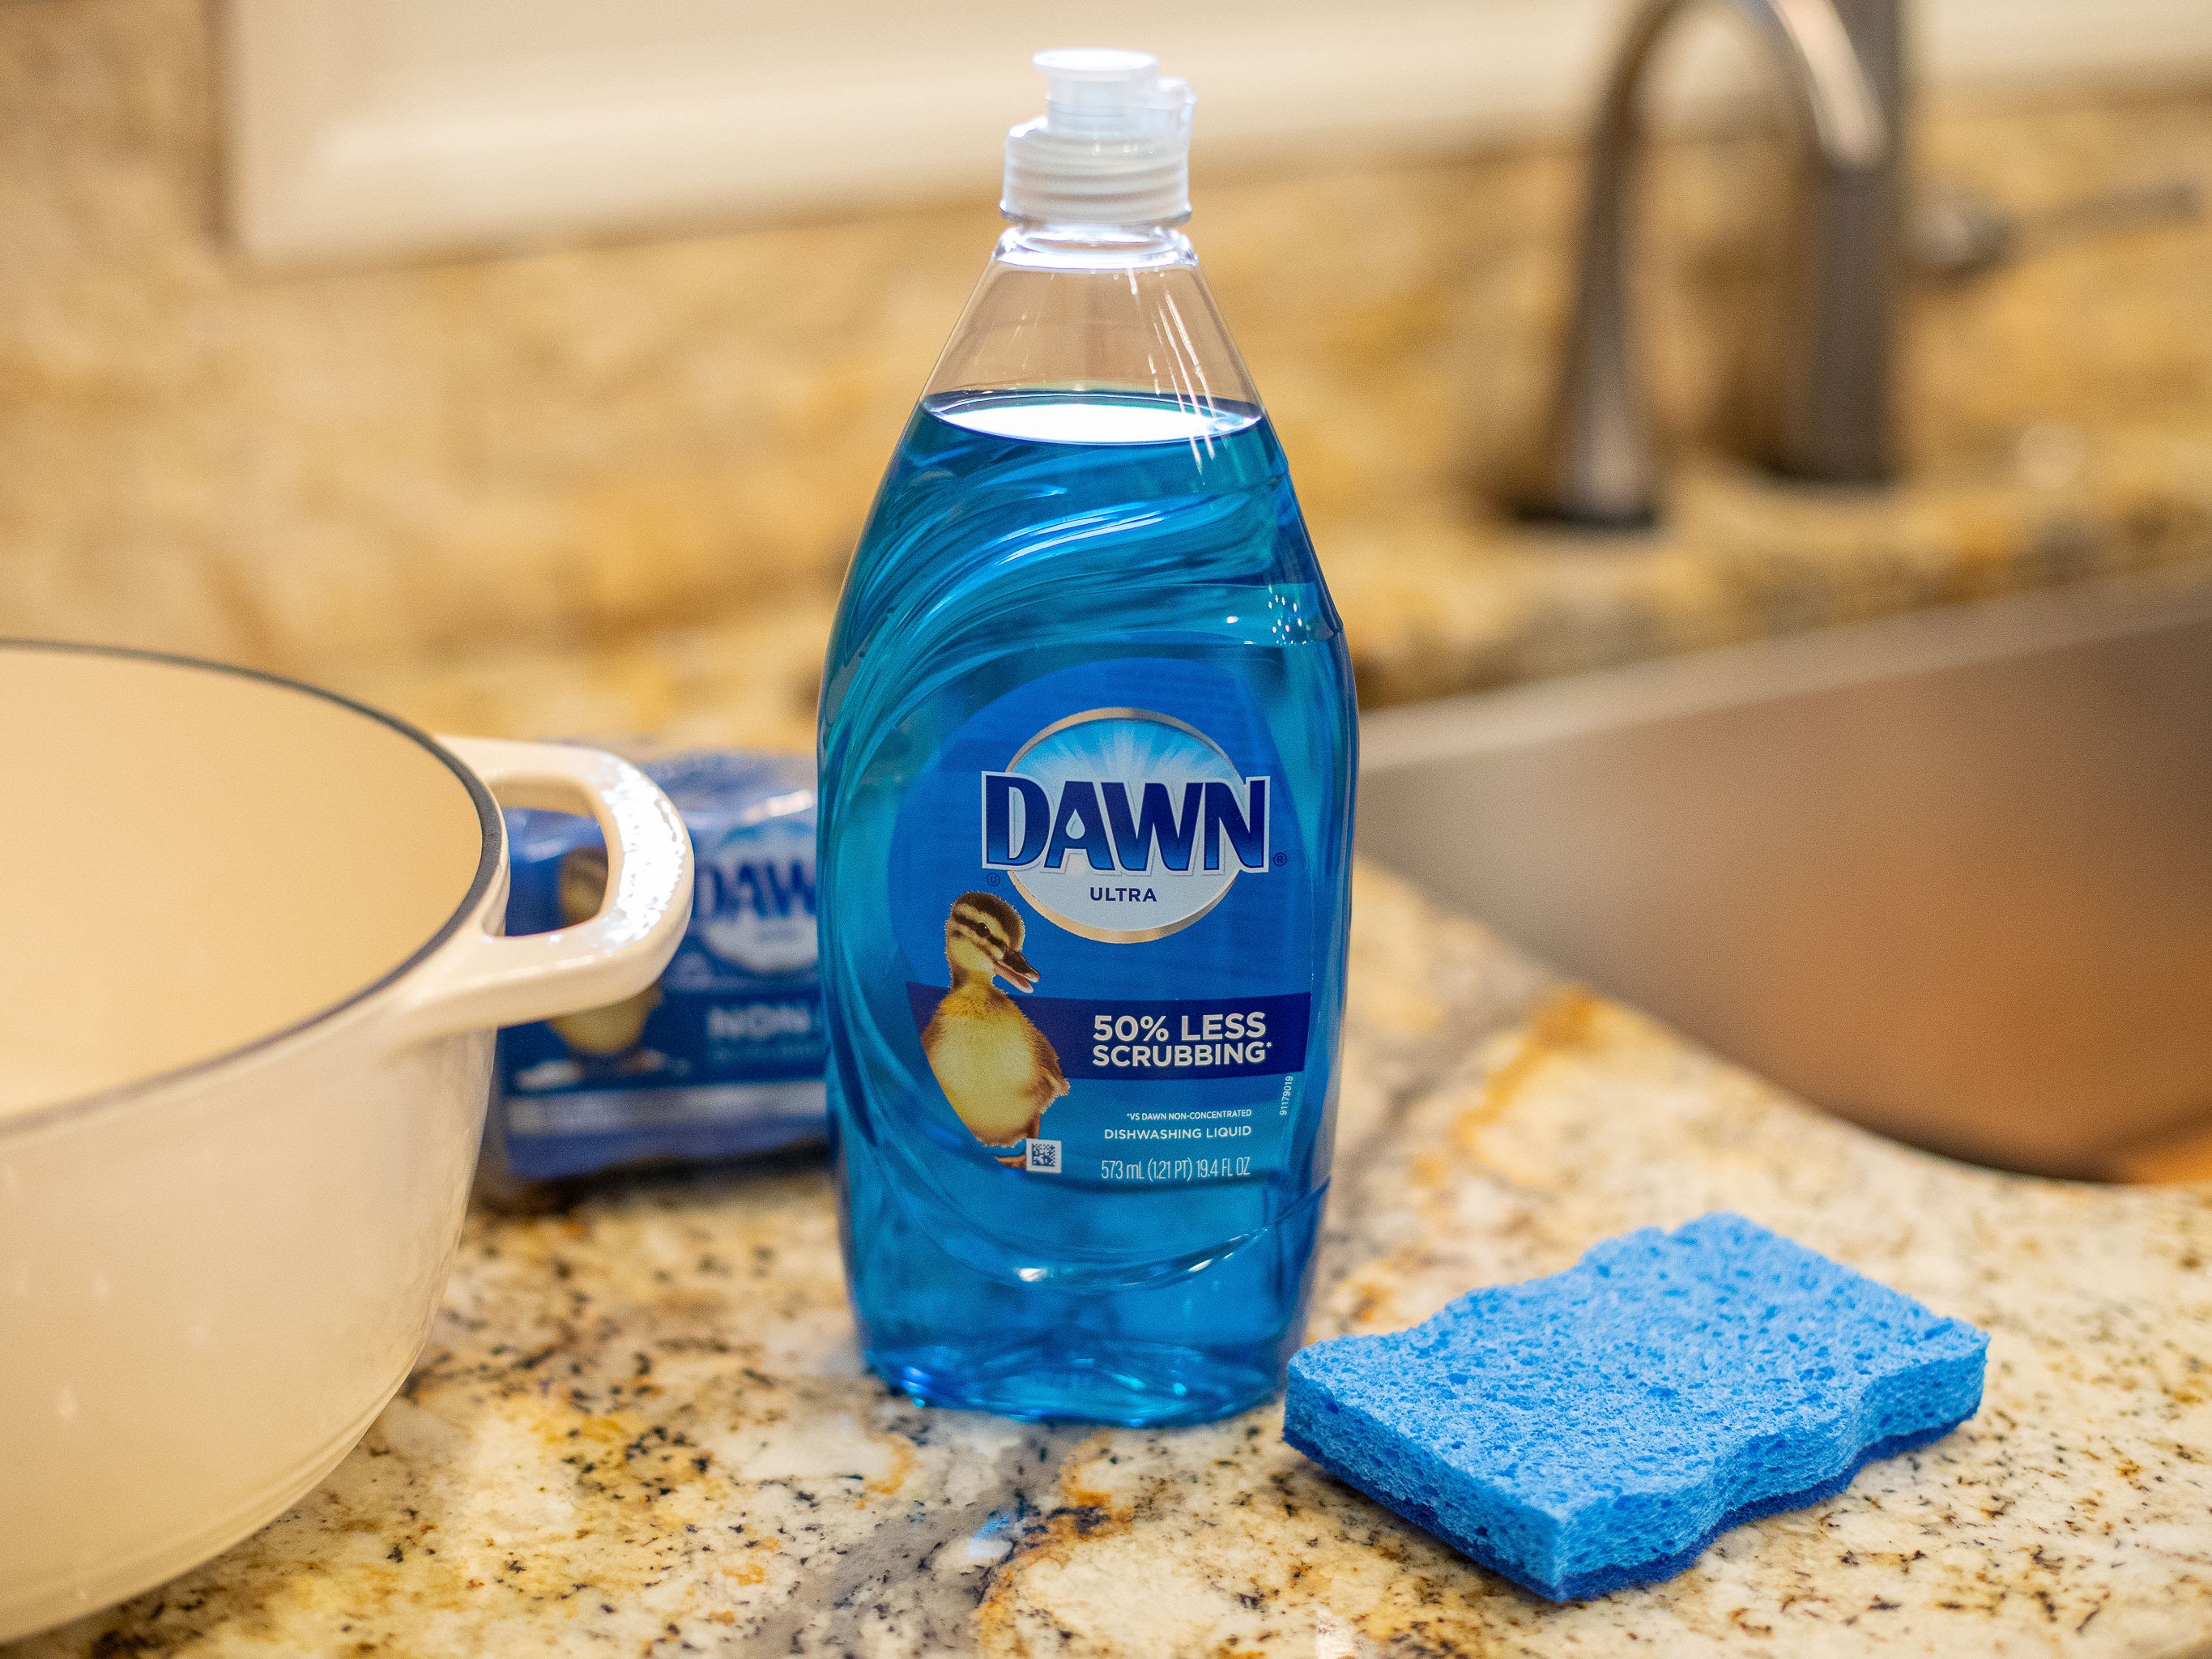 New Dawn Digital Coupon For The Publix Sale- Dish Soap As Low As $2.89 Per Bottle (Plus Discounted Powerwash)